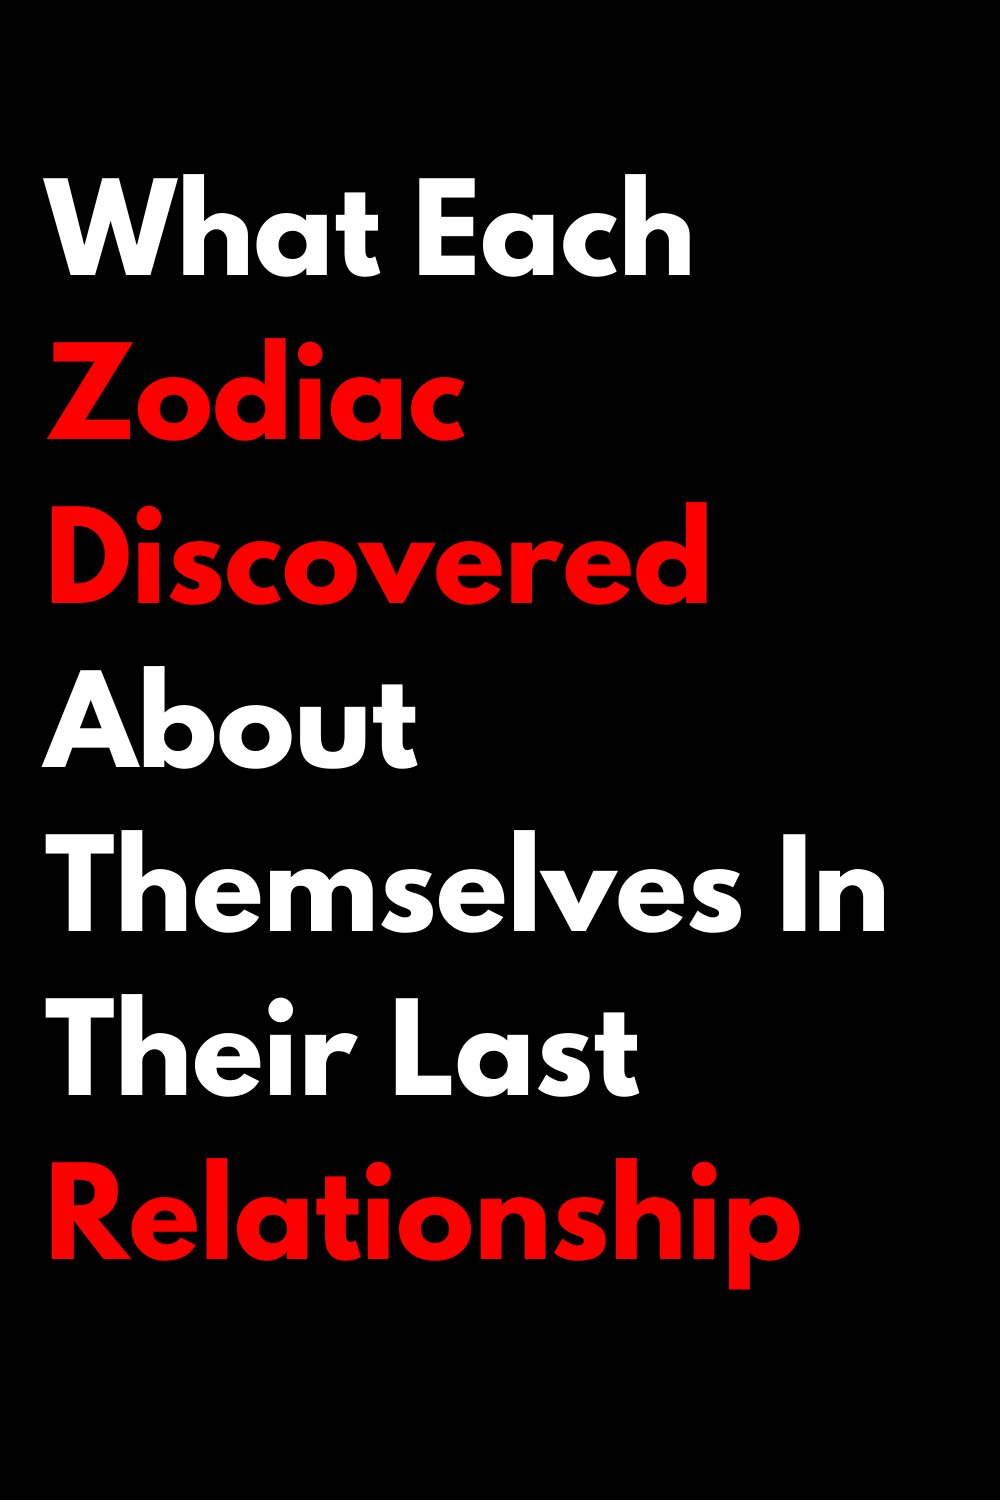 What Each Zodiac Discovered About Themselves In Their Last Relationship